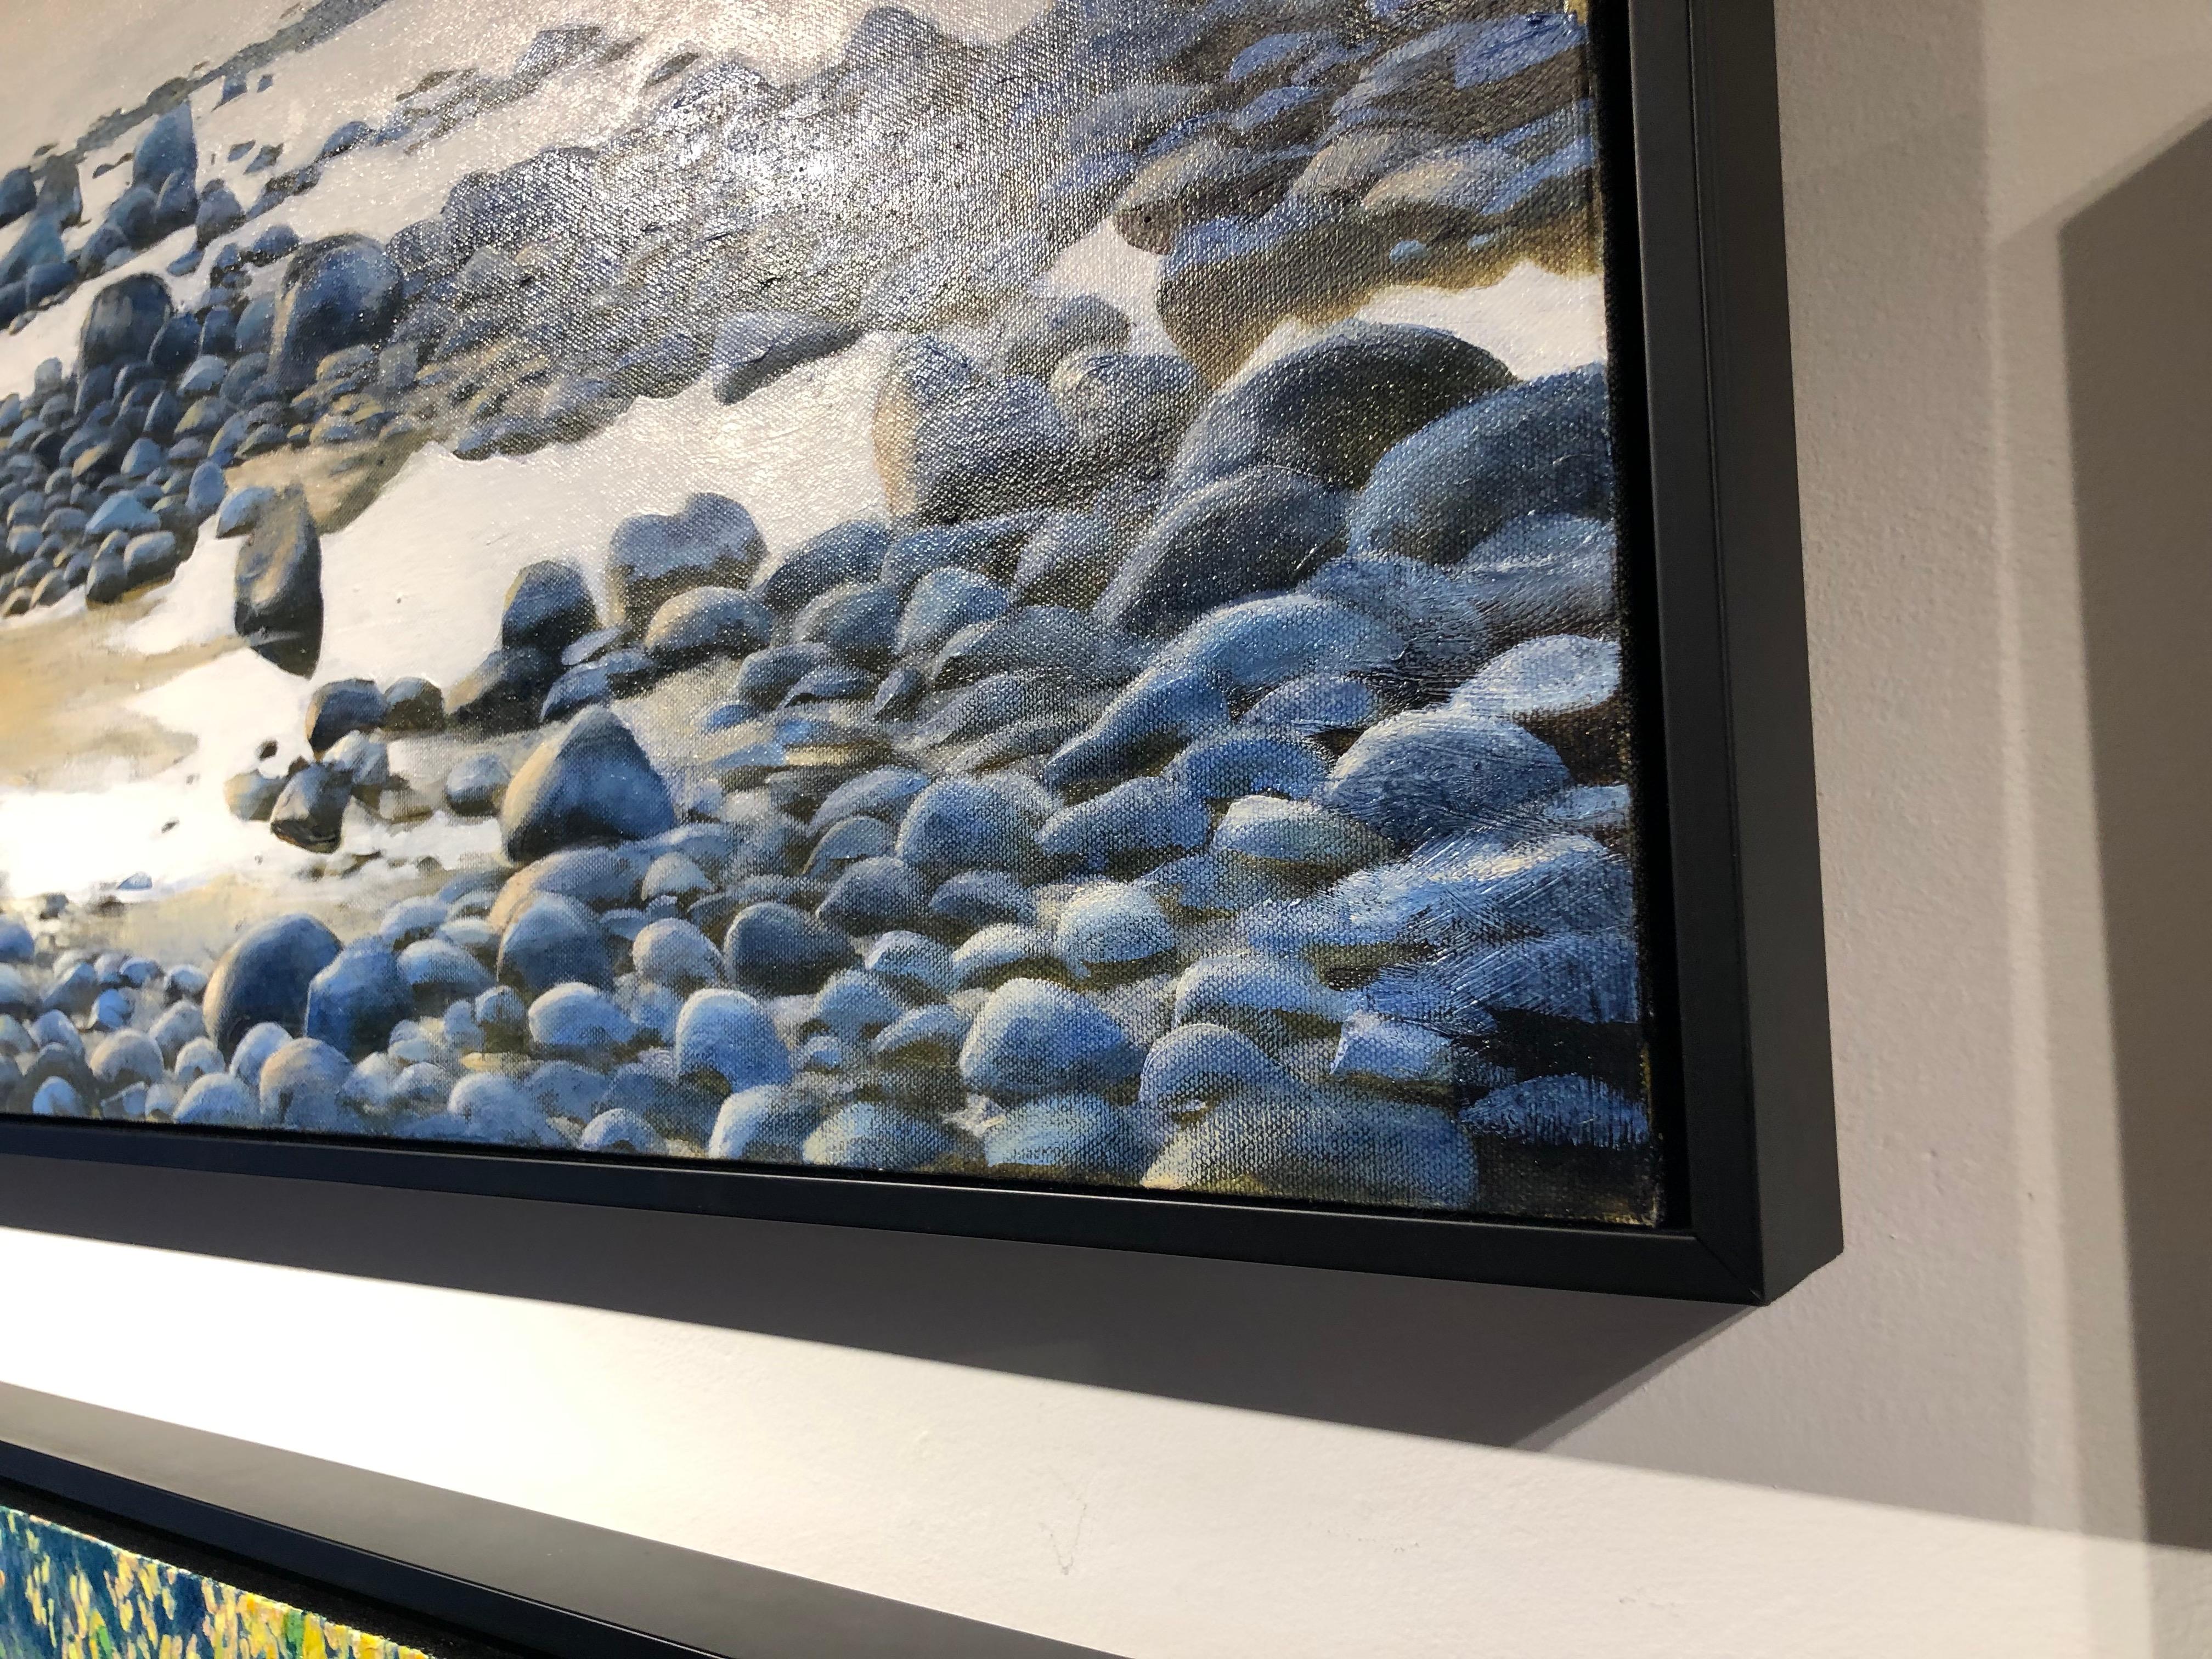 Going Blue - Original Oil on Canvas Painting with Water and Stones at the Shore 1